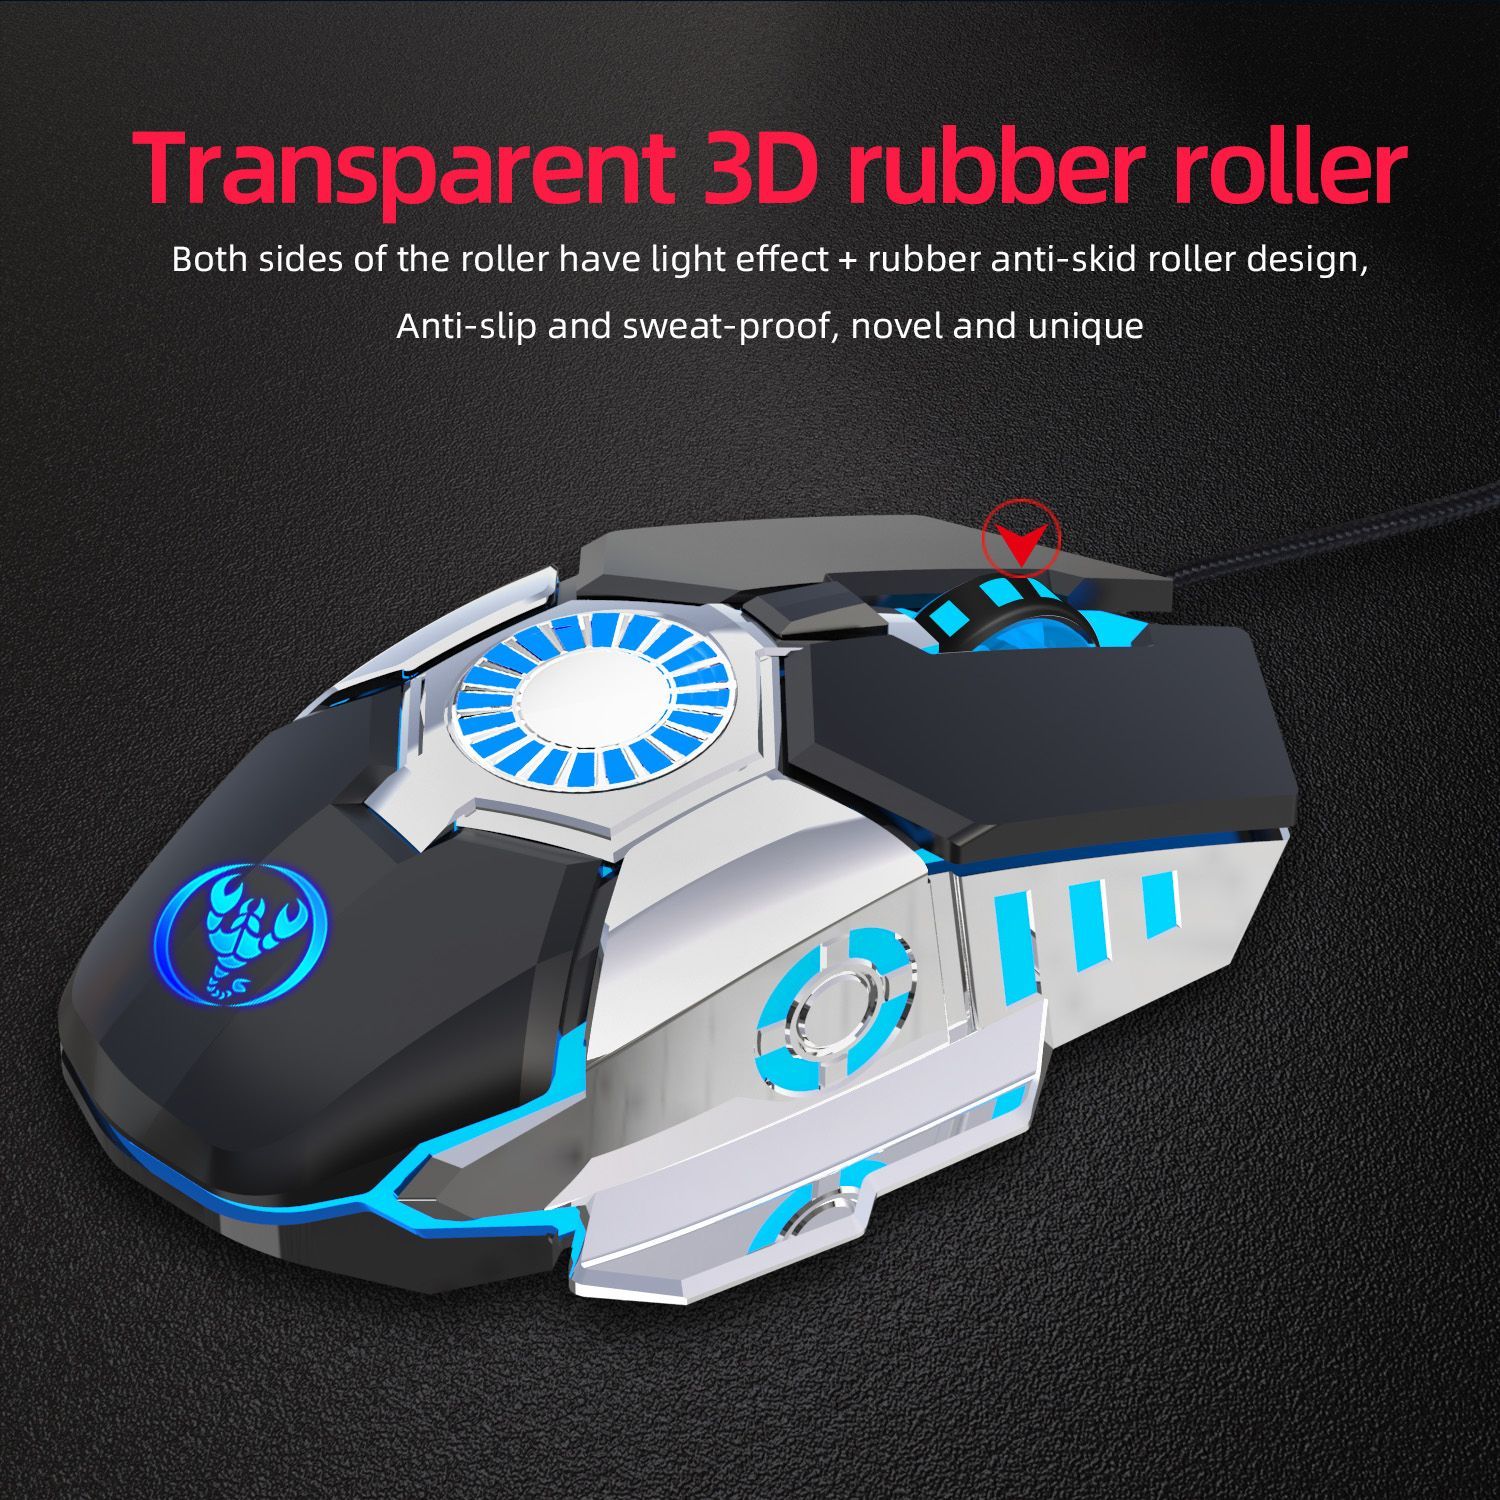 HXSJ-V700-Wired-Gaming-Mouse-6-Buttons-Macro-Programming-Mouse-Four-Speed-6400DPI-Colorful-RGB-Backl-1747809